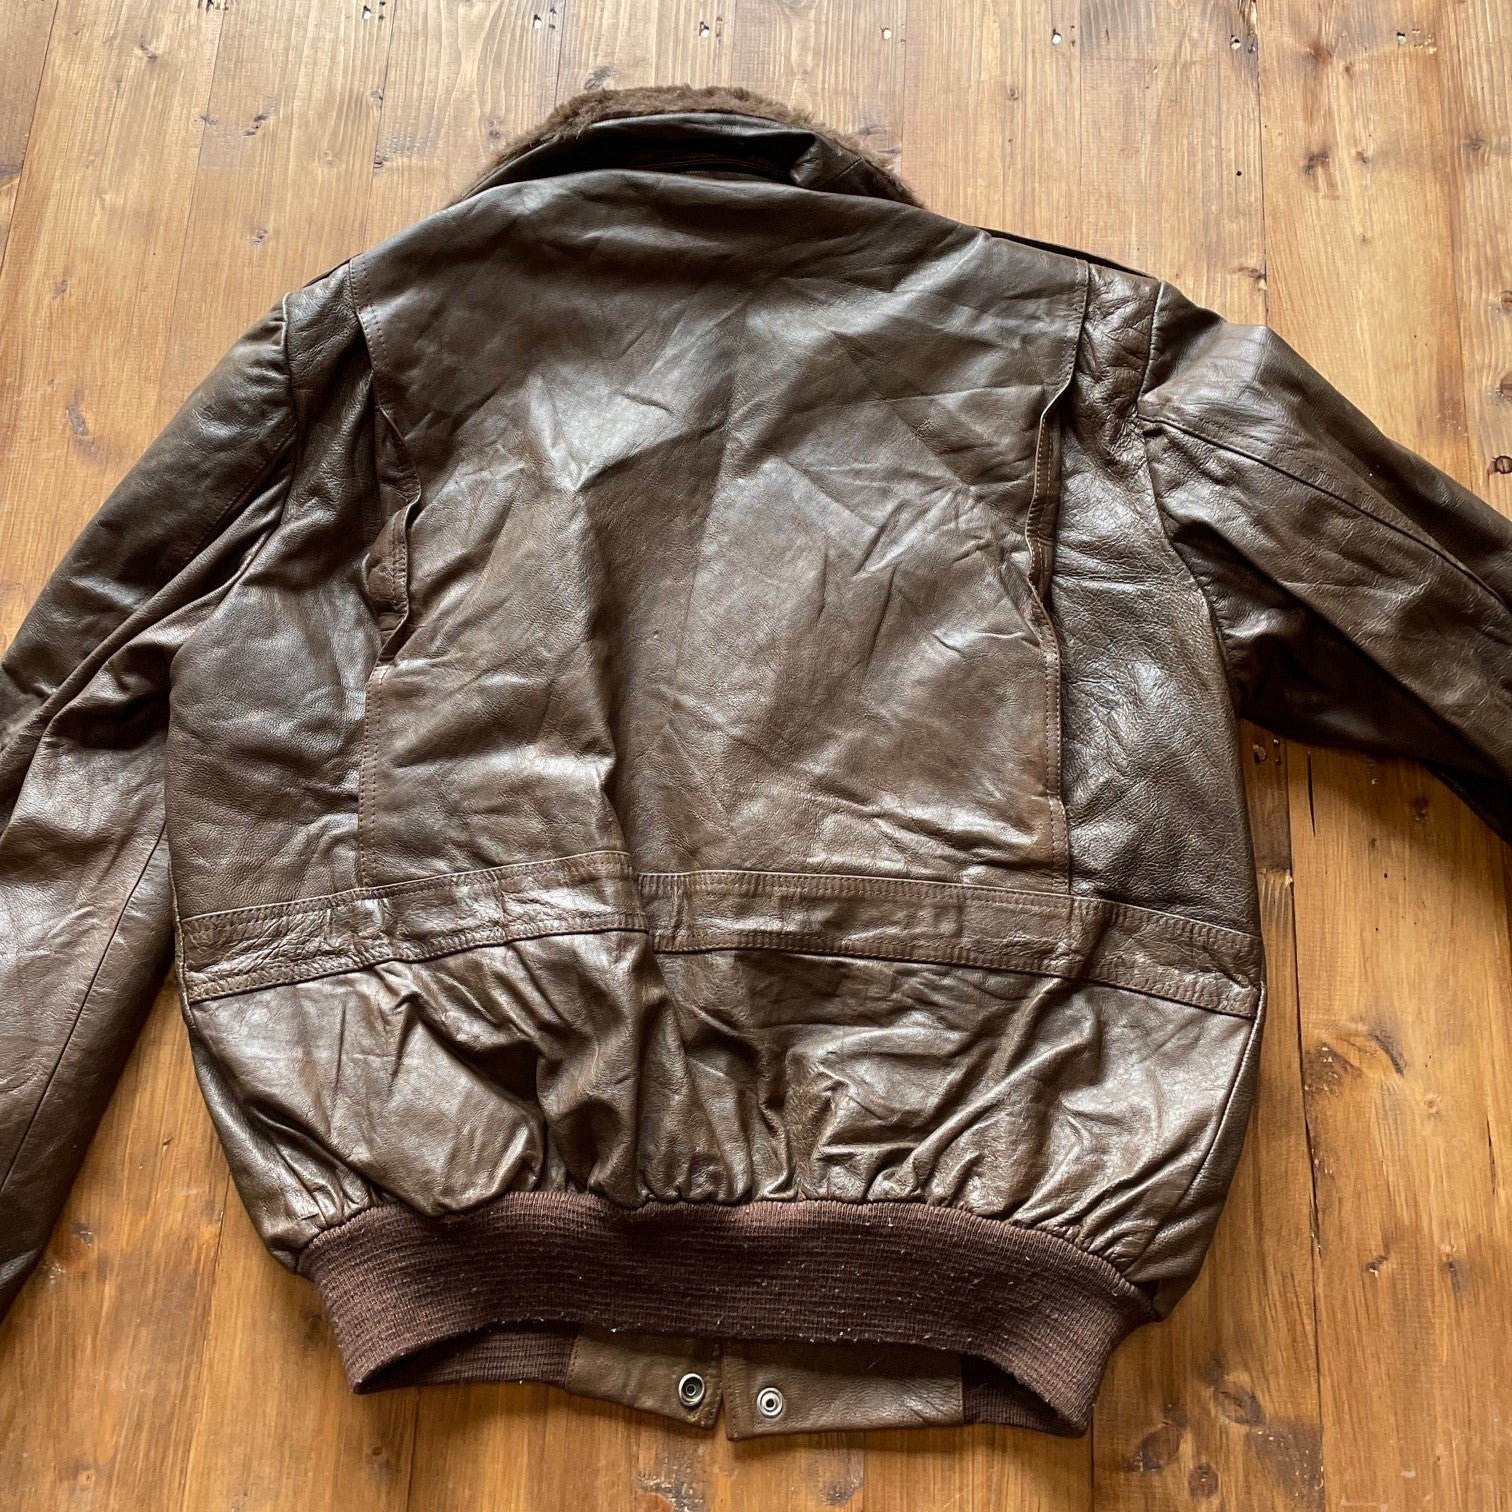 Brown leather flight jacket with detachable fur collar